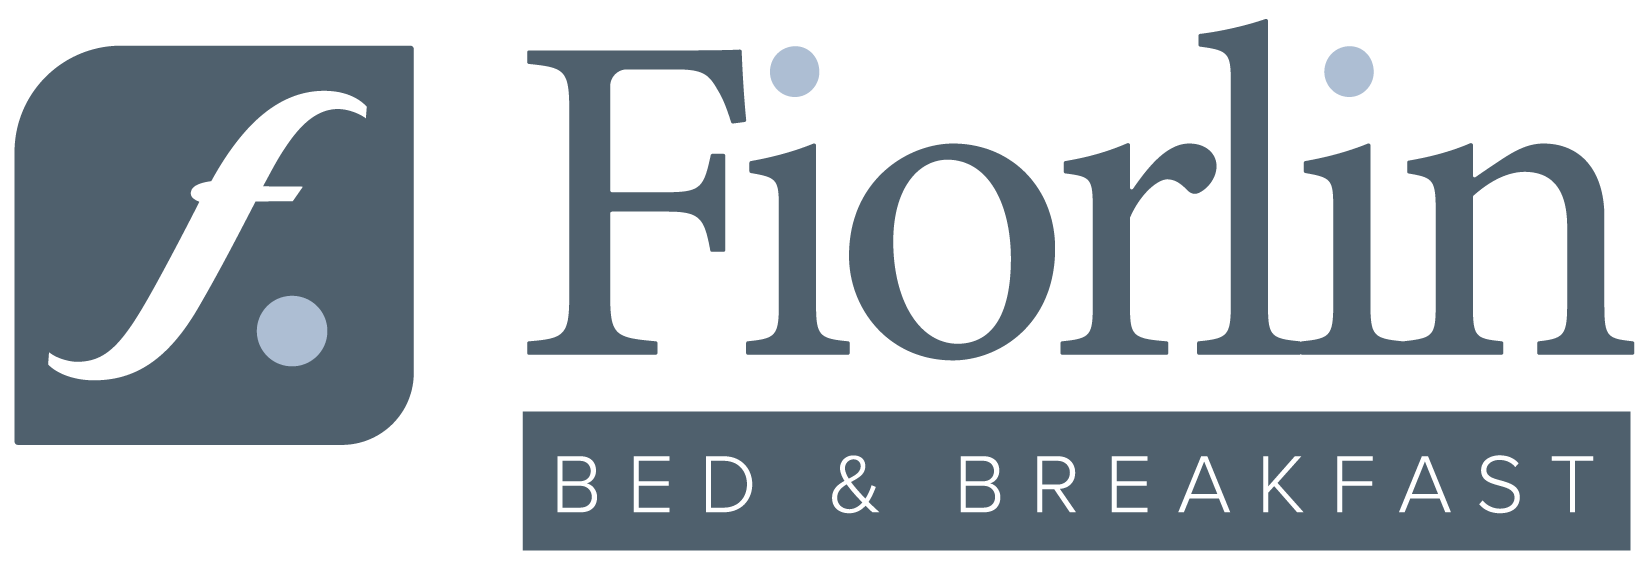 Fiorlin, Bed and Breakfast, Melrose